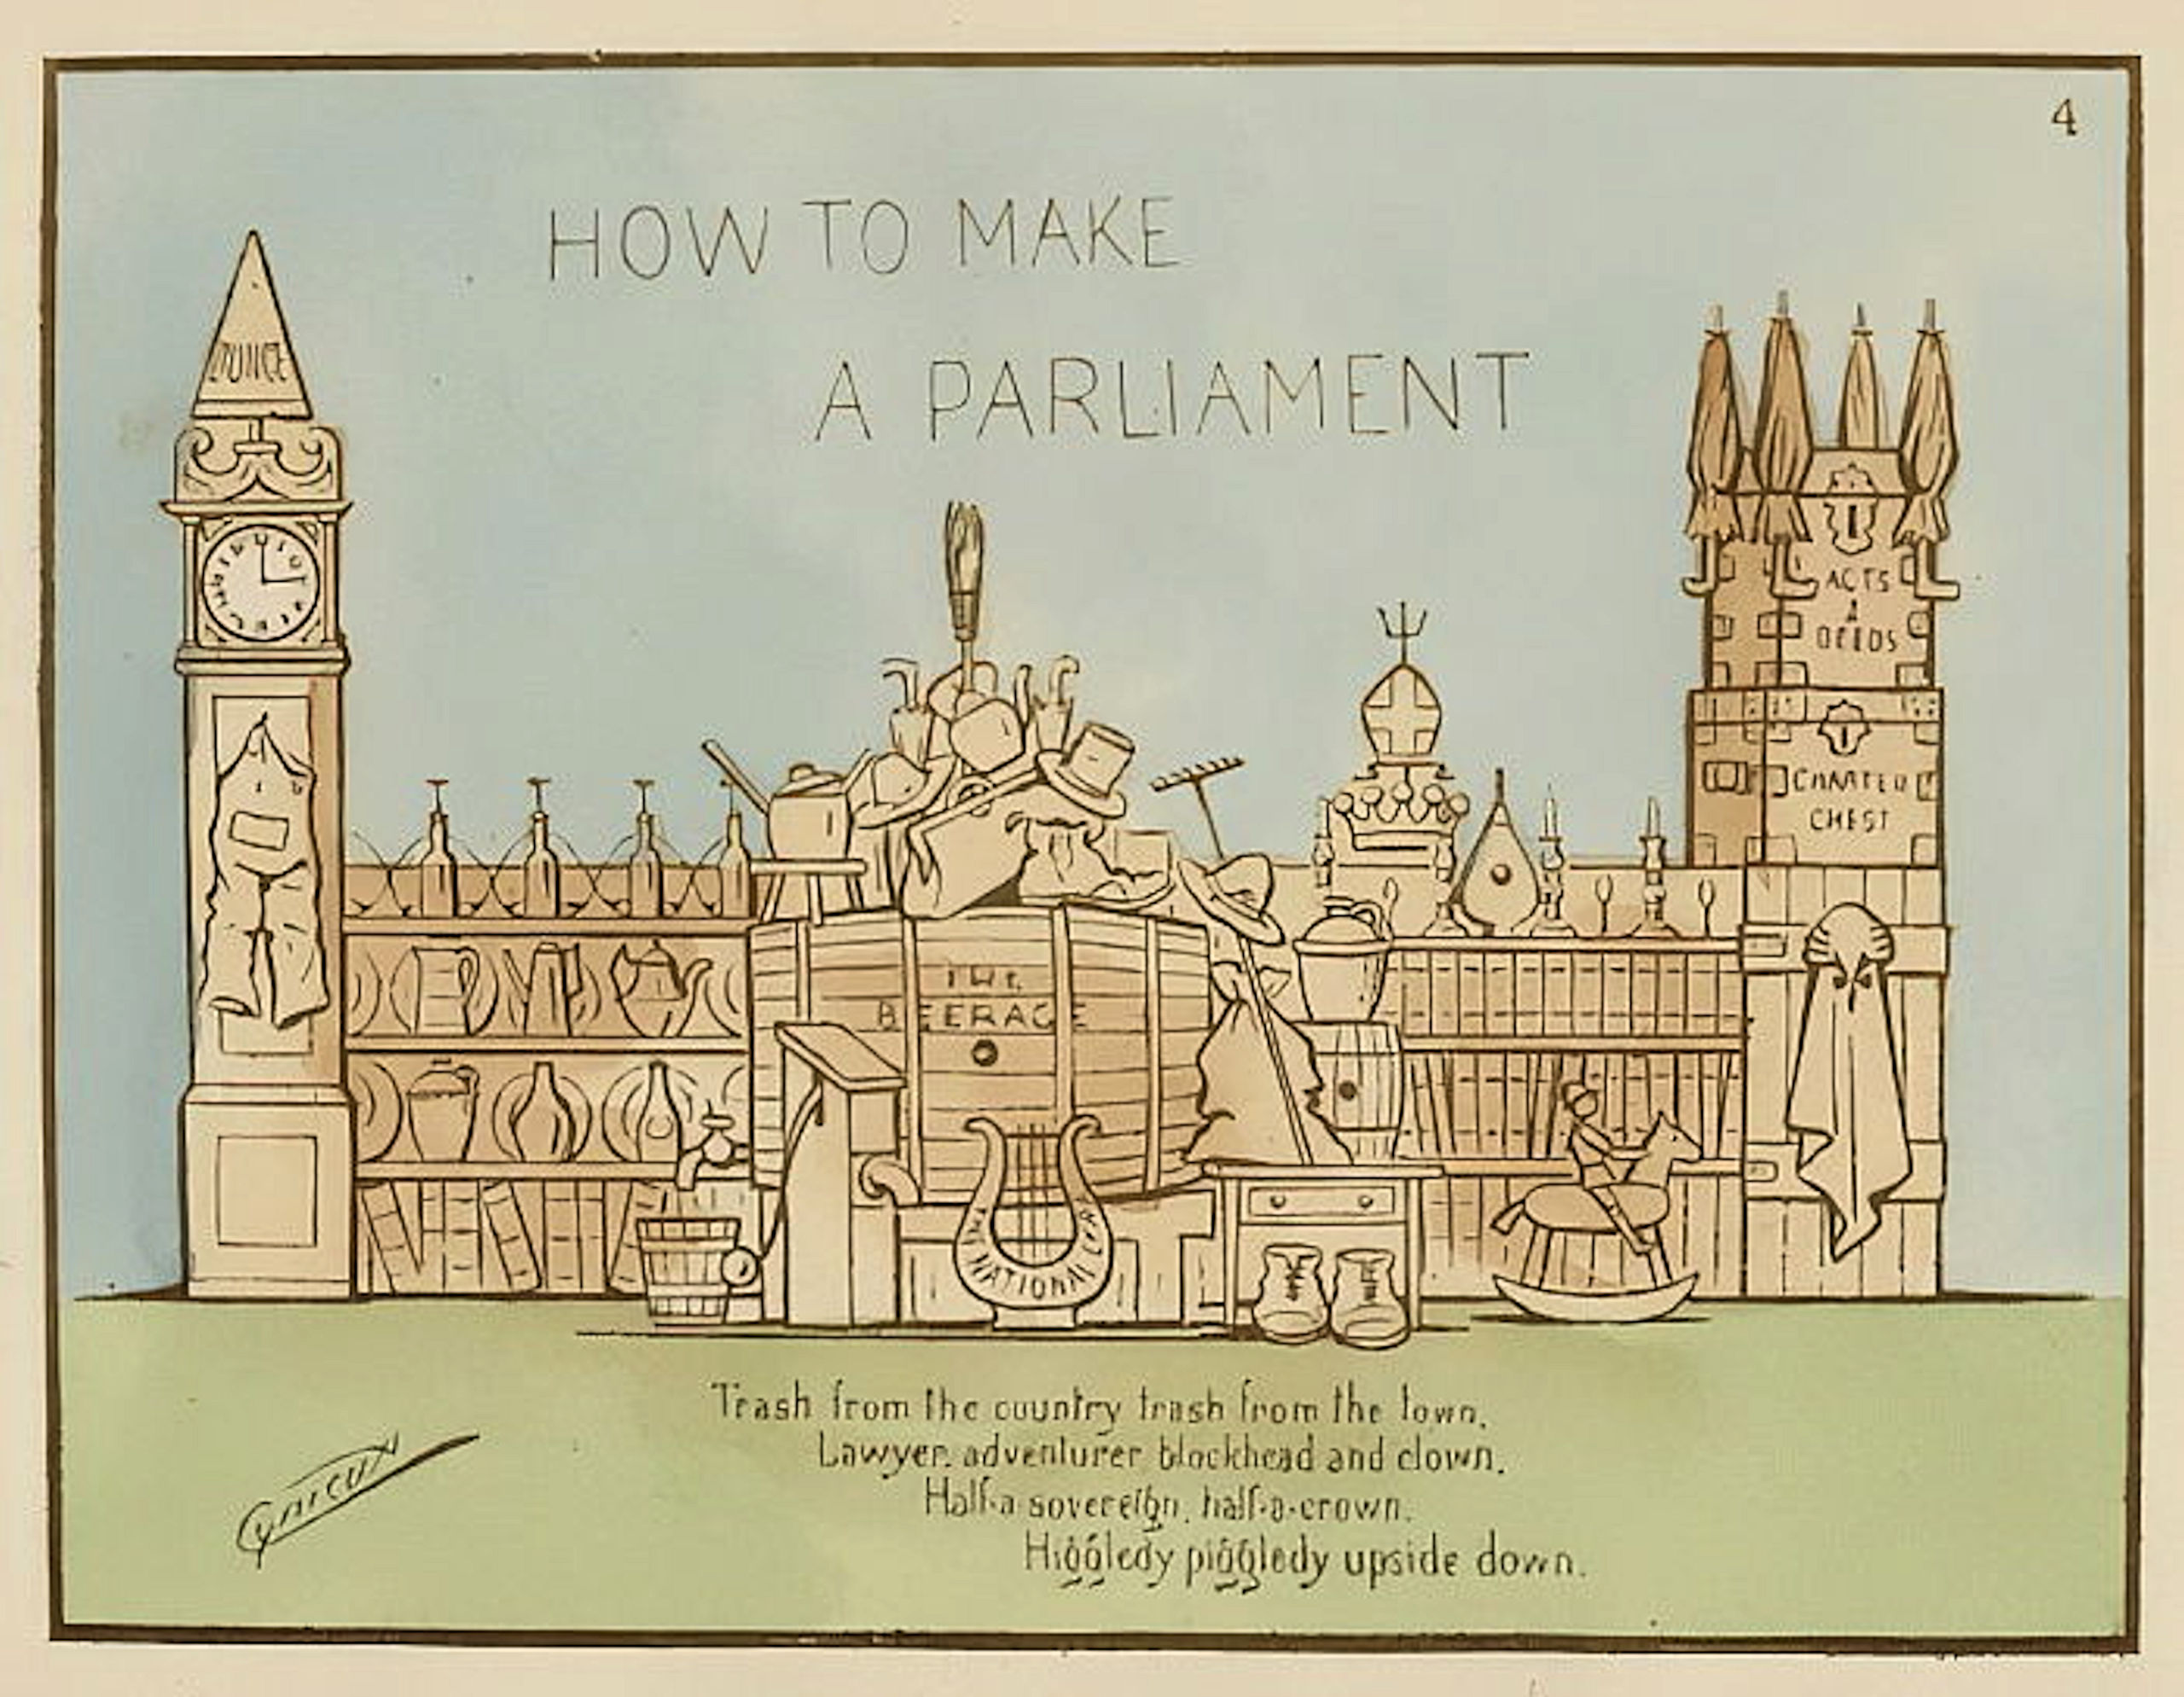 Tayport Heritage Trail - Board 6 - Cynicus postcard example - "How to make a parliament"